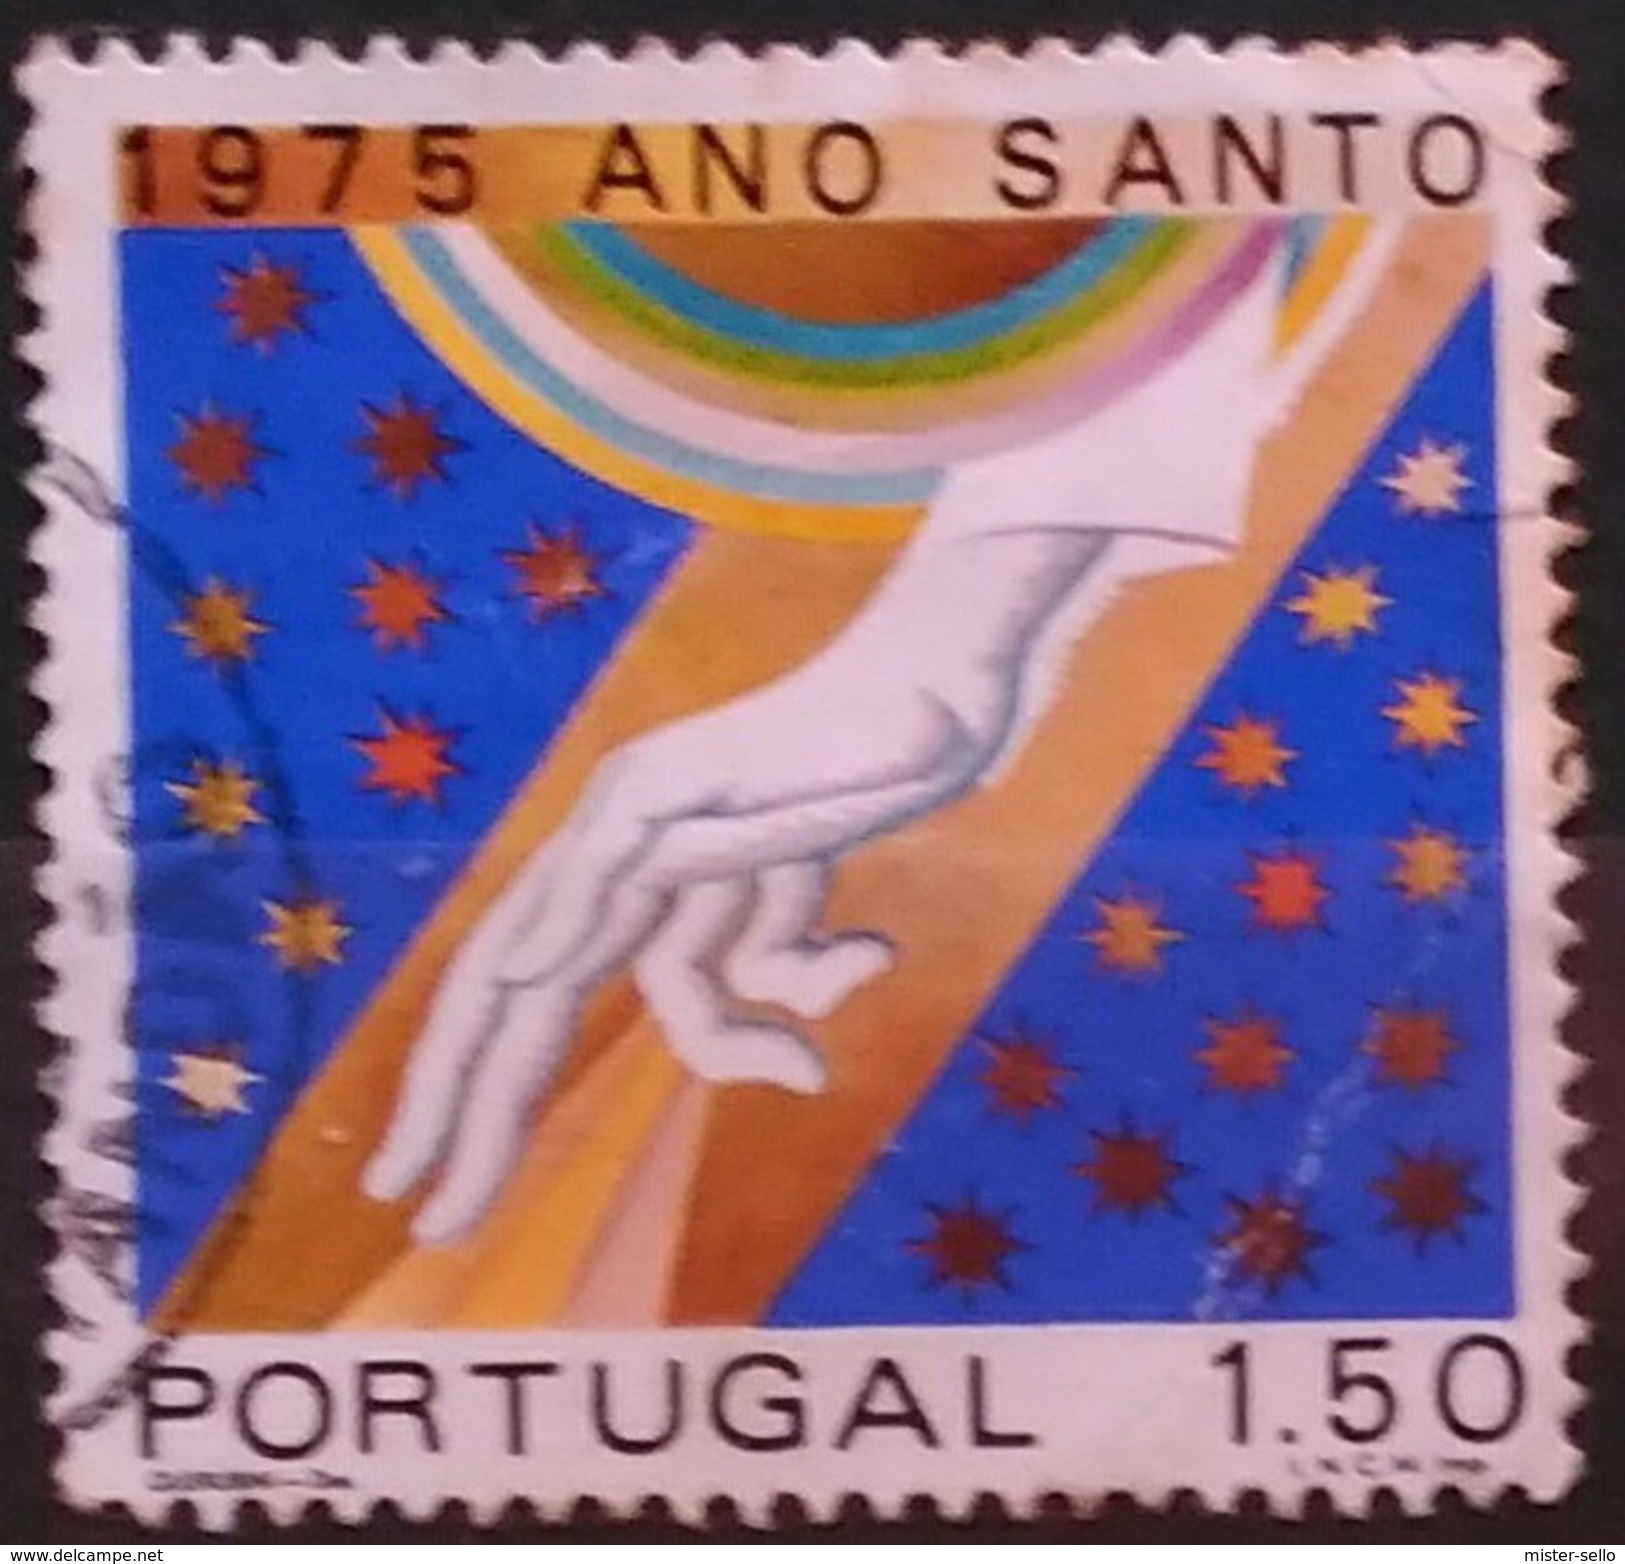 PORTUGAL 1975 The Holy Year Of 1975. USADO - USED. - Gebraucht